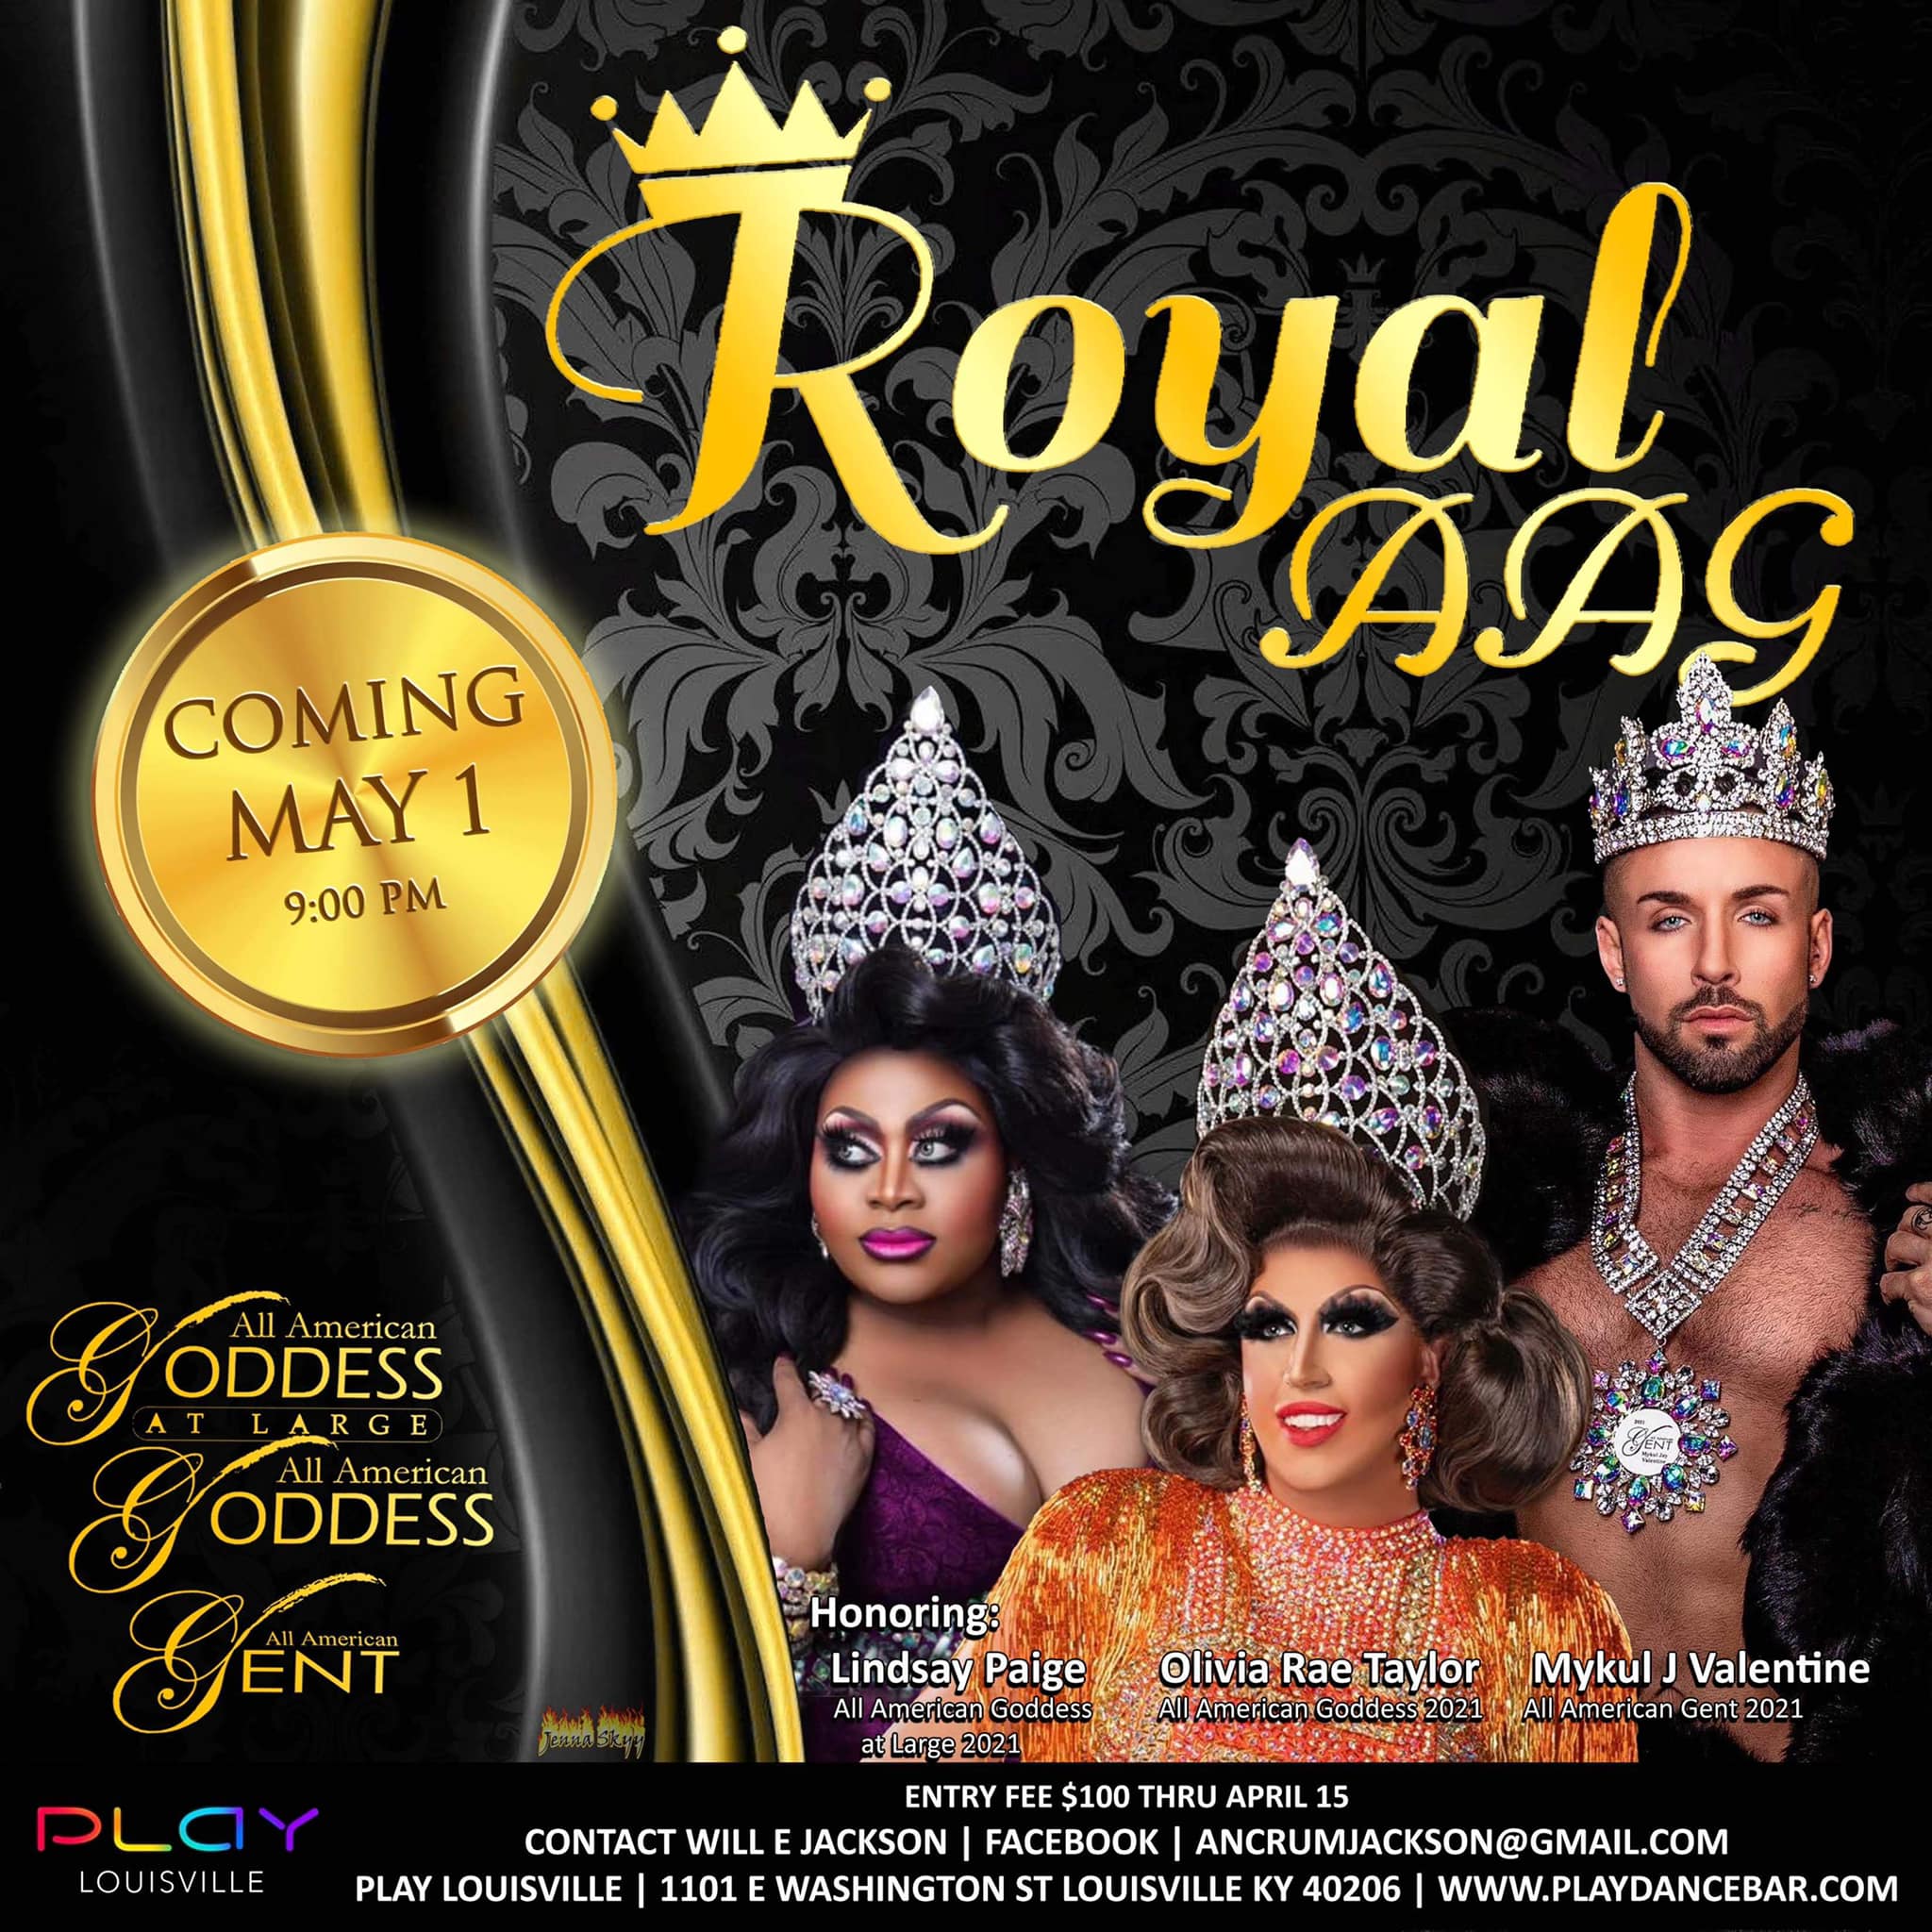 Ad | Royal All American Goddess, at Large and Gent | Play (Louisville, Kentucky) | 5/1/2022